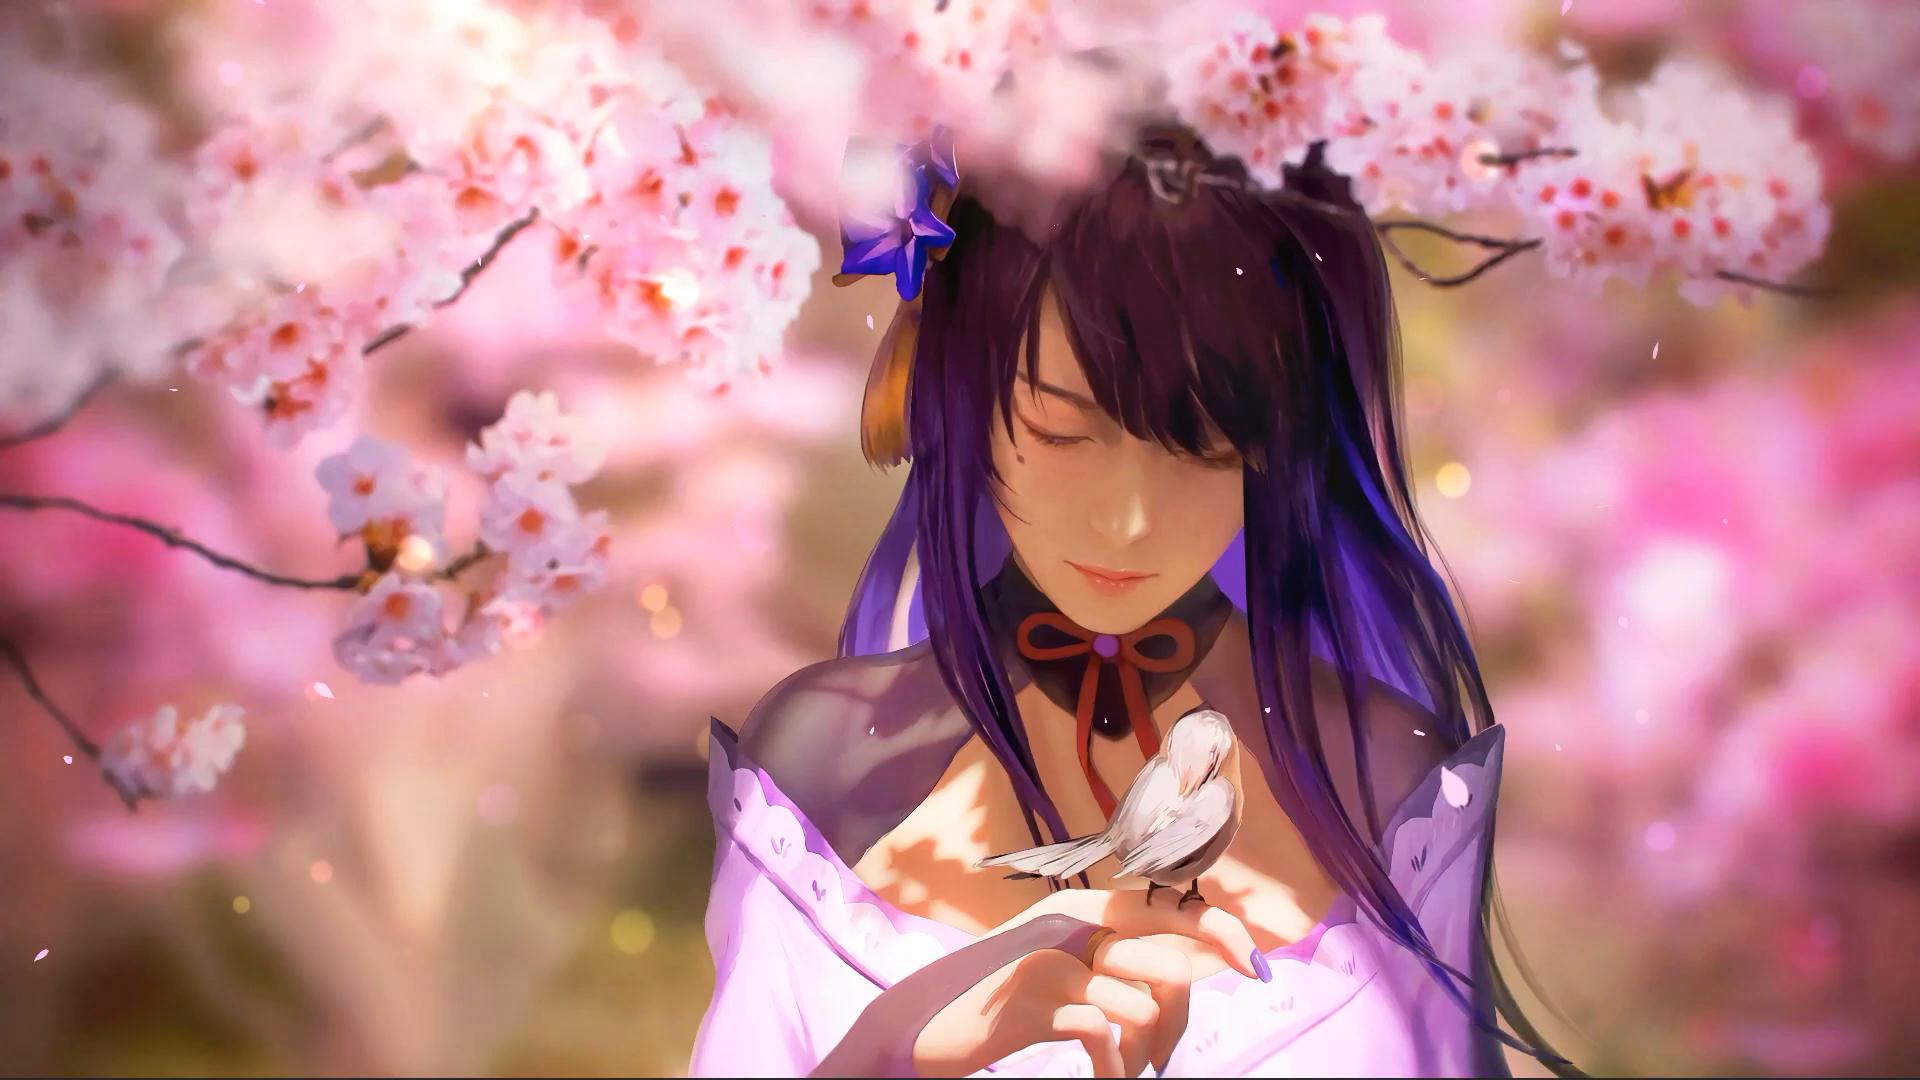 420+ Cherry Blossom HD Wallpapers and Backgrounds